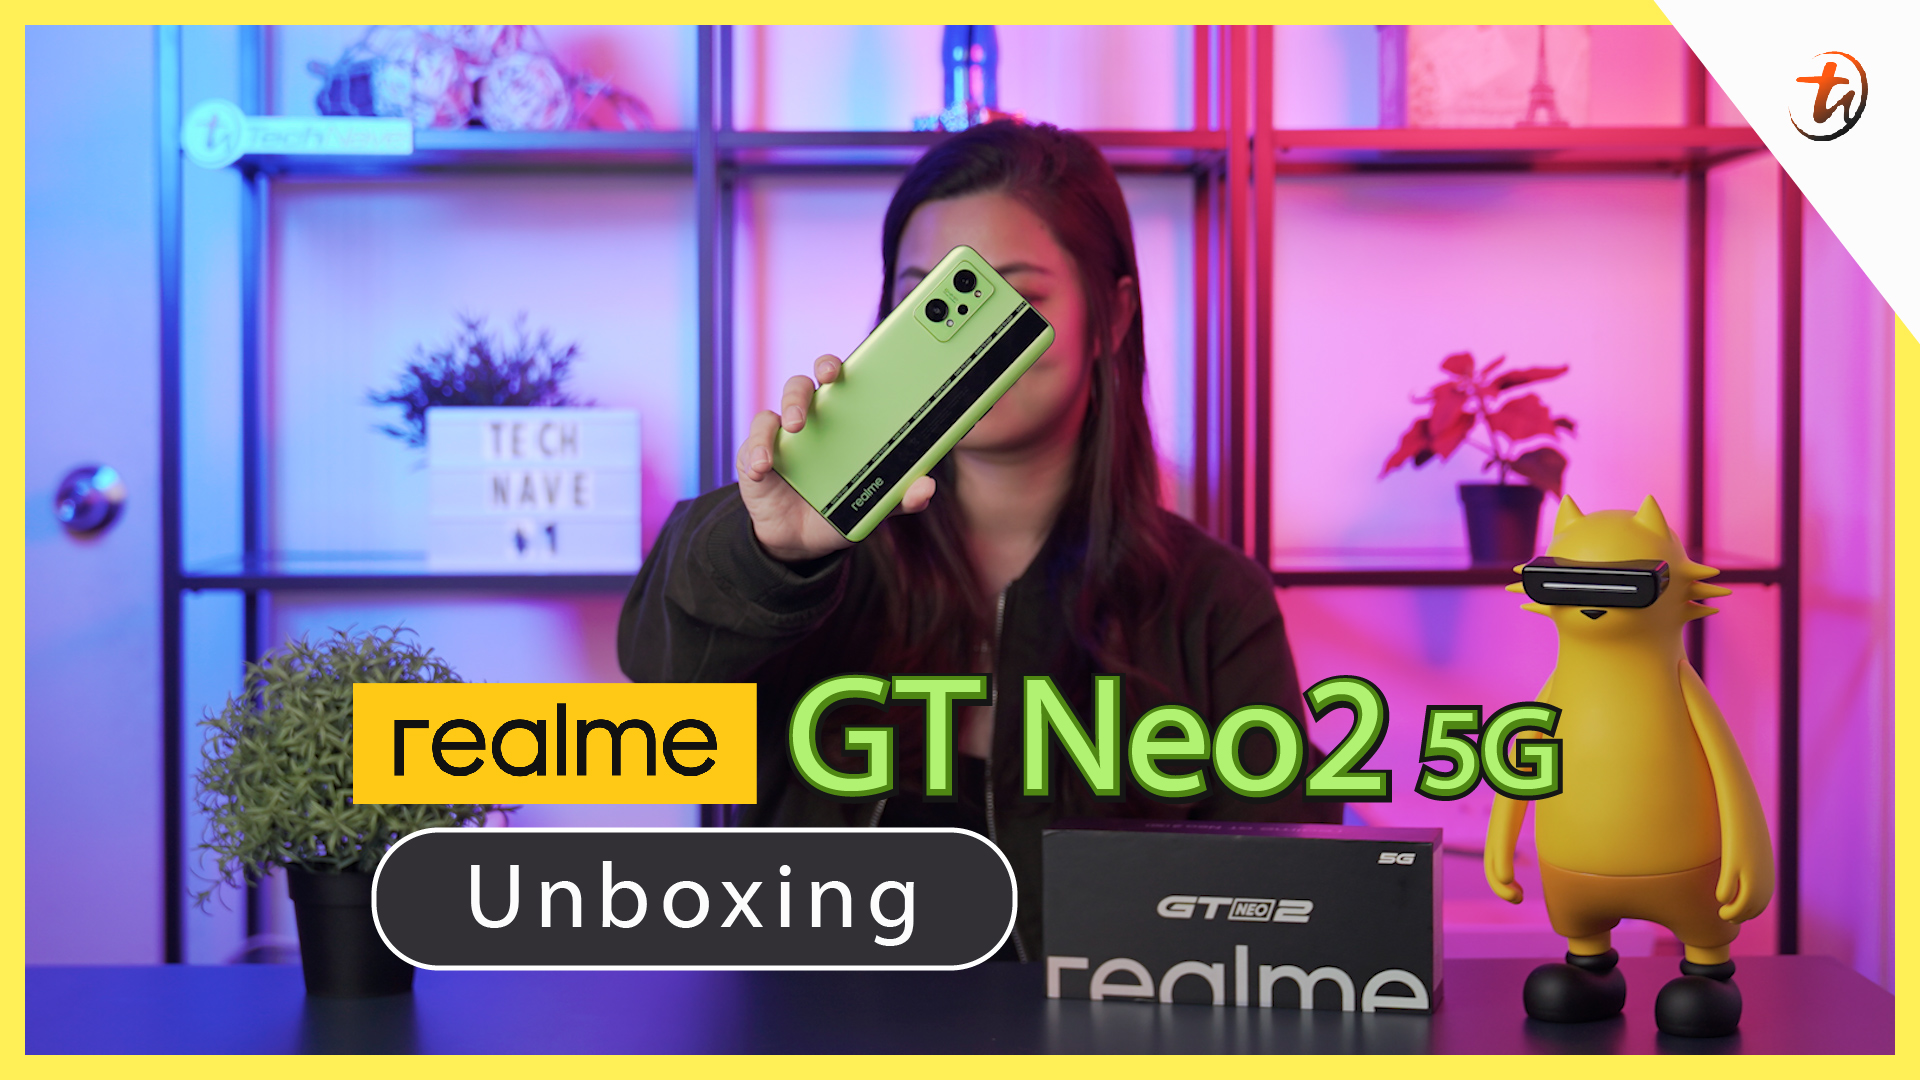 realme GT Neo2 - Stylish gaming phone| TechNave Unboxing and Hands-On Video